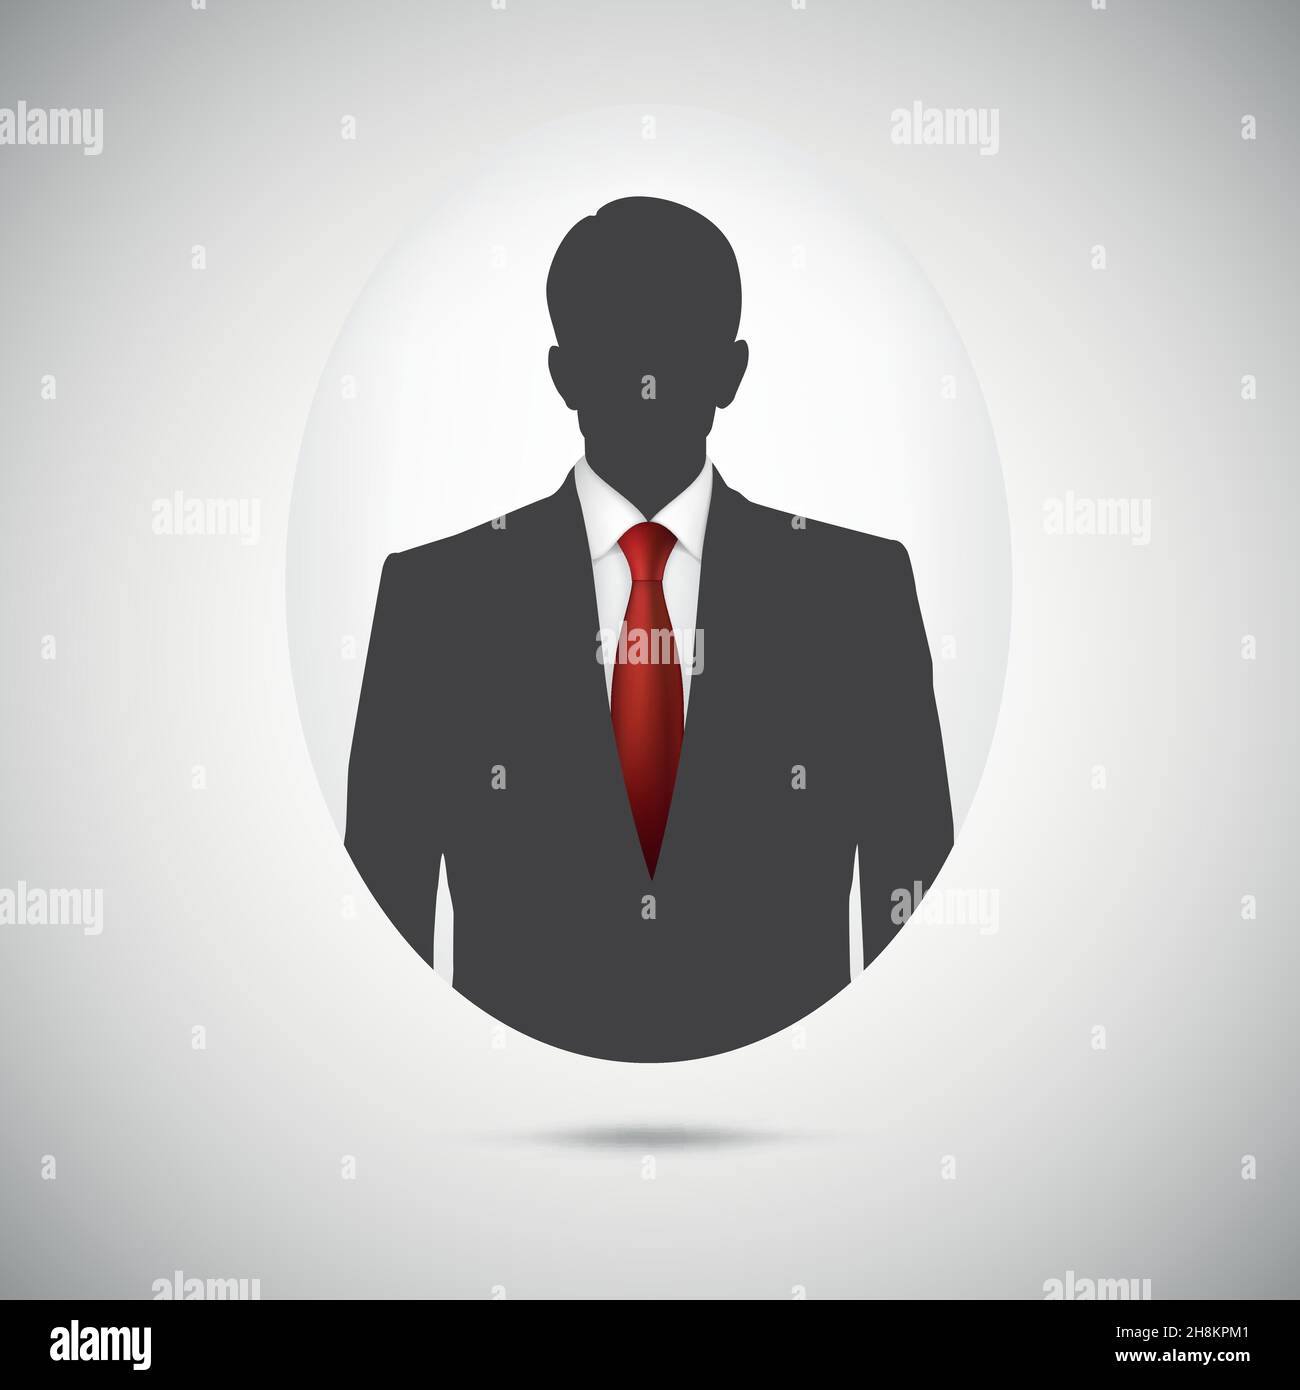 Male person silhouette. Profile picture whith red tie. Stock Vector